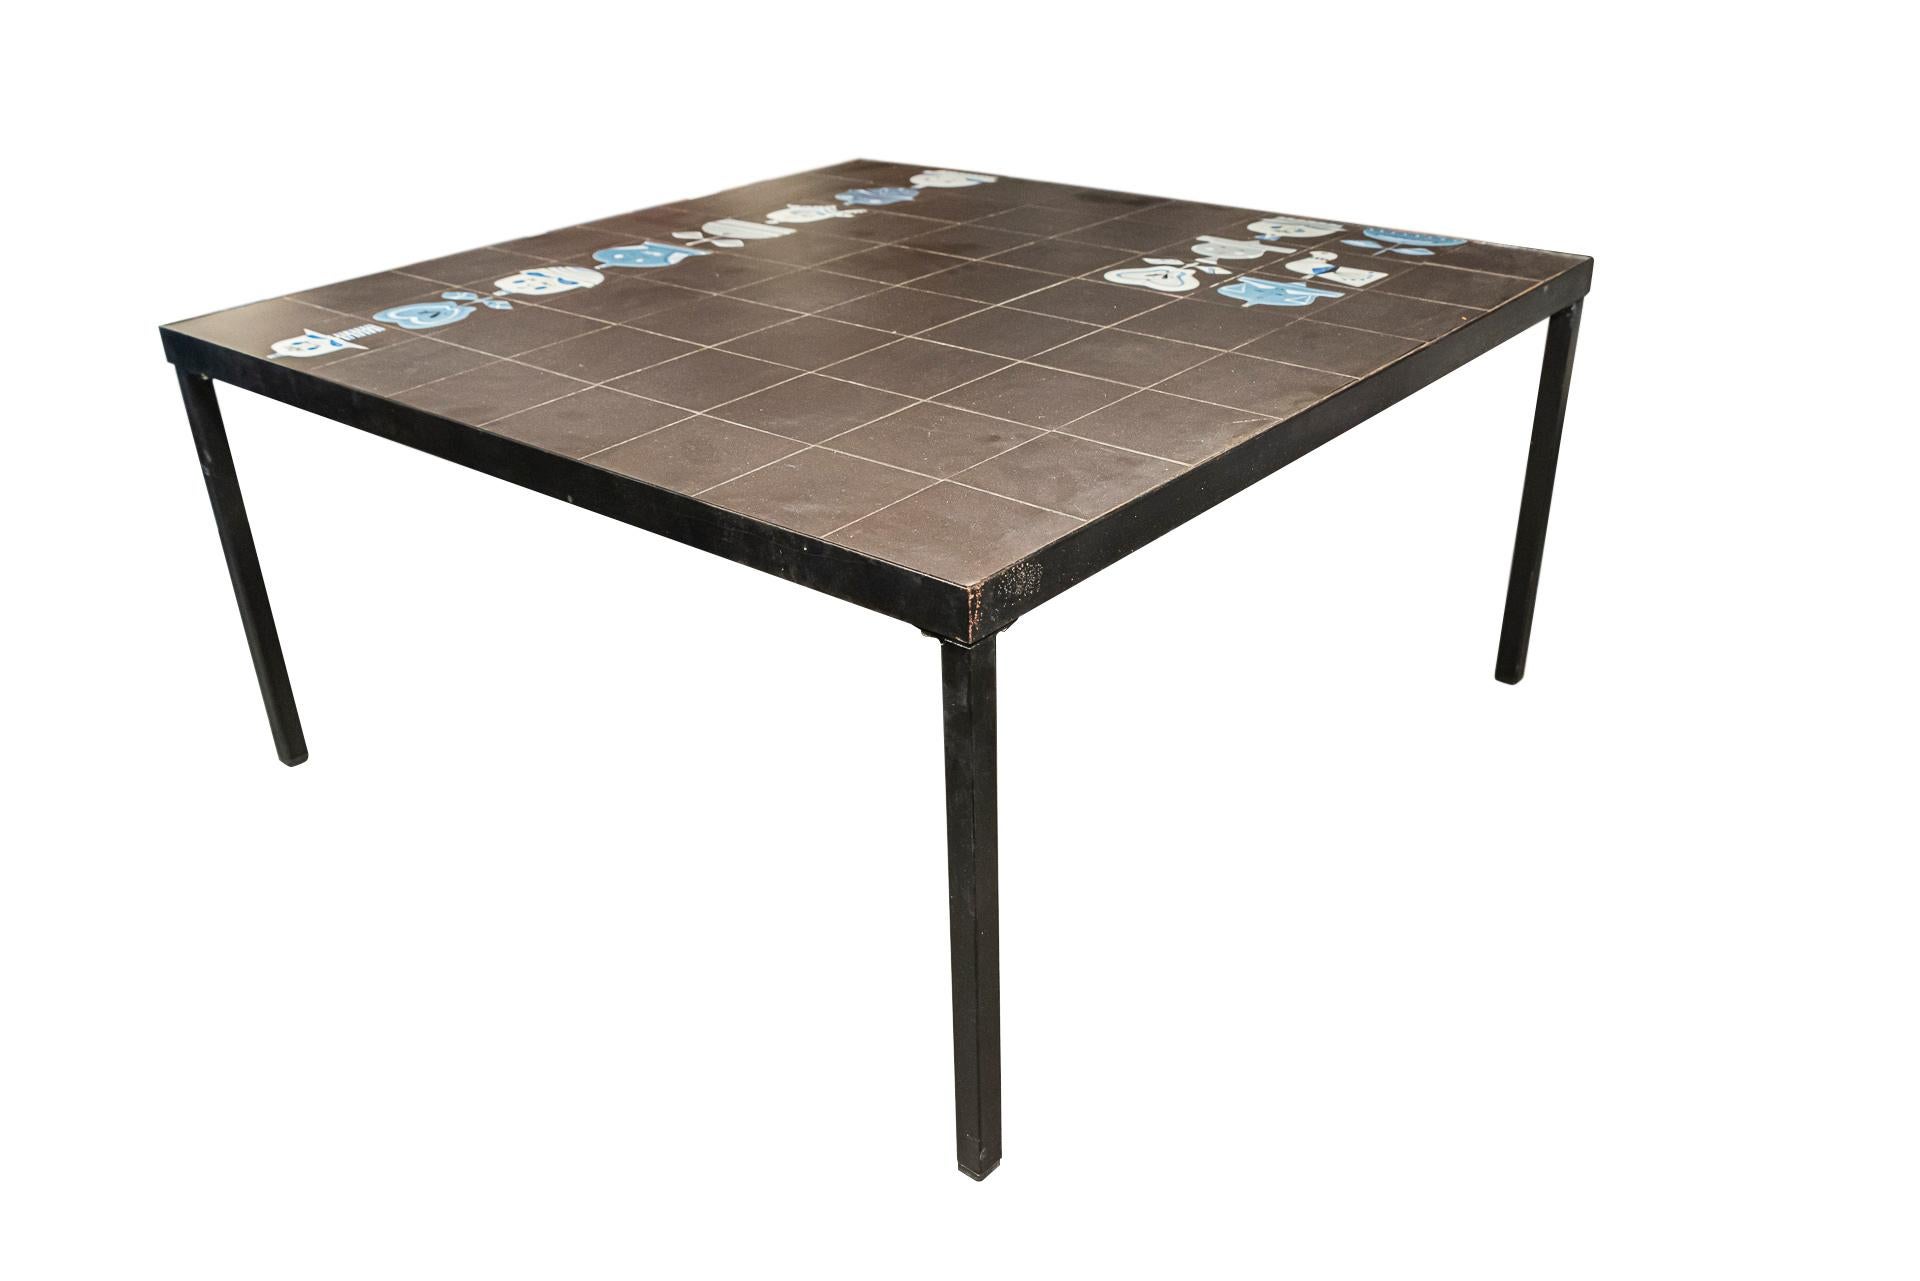 Square coffee table, 
Matte ceramic, black or colored enameled tiles possibly Roger Capron, metal lacquered foot,
Remade bottom, no signature,
France, circa 1970.

Measures: Width 80.6 cm, depth 80.6 cm, height 39.4 cm.

Roger Capron, born in